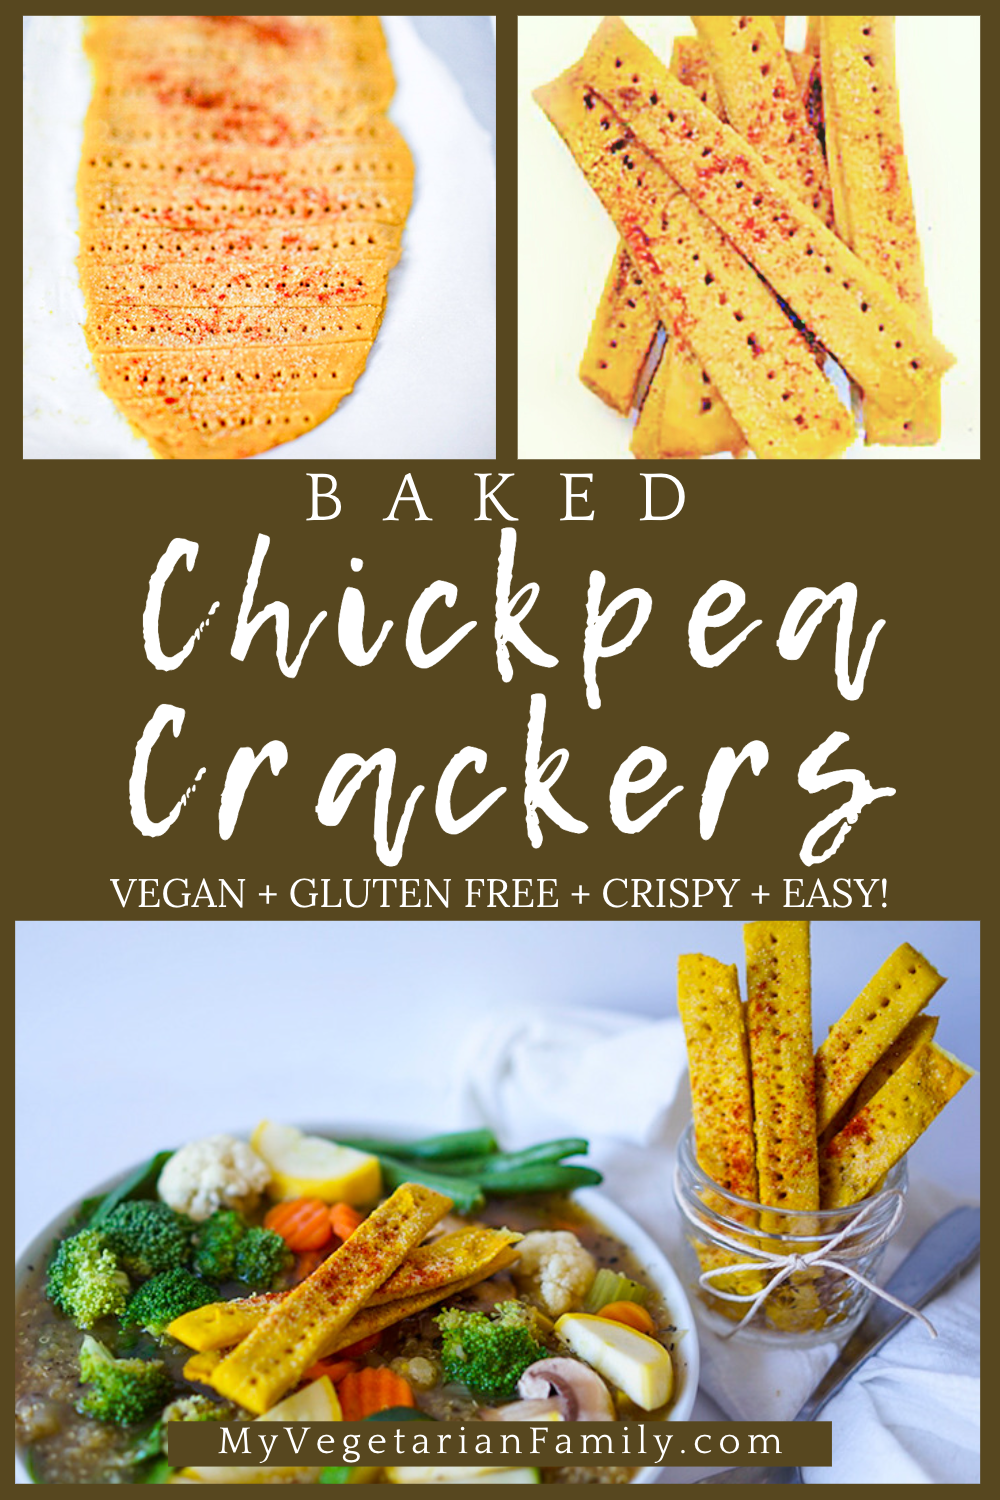 Baked Chickpea Crackers | My Vegetarian Family #bakedchickpeacrackers #homemadevegancrackers